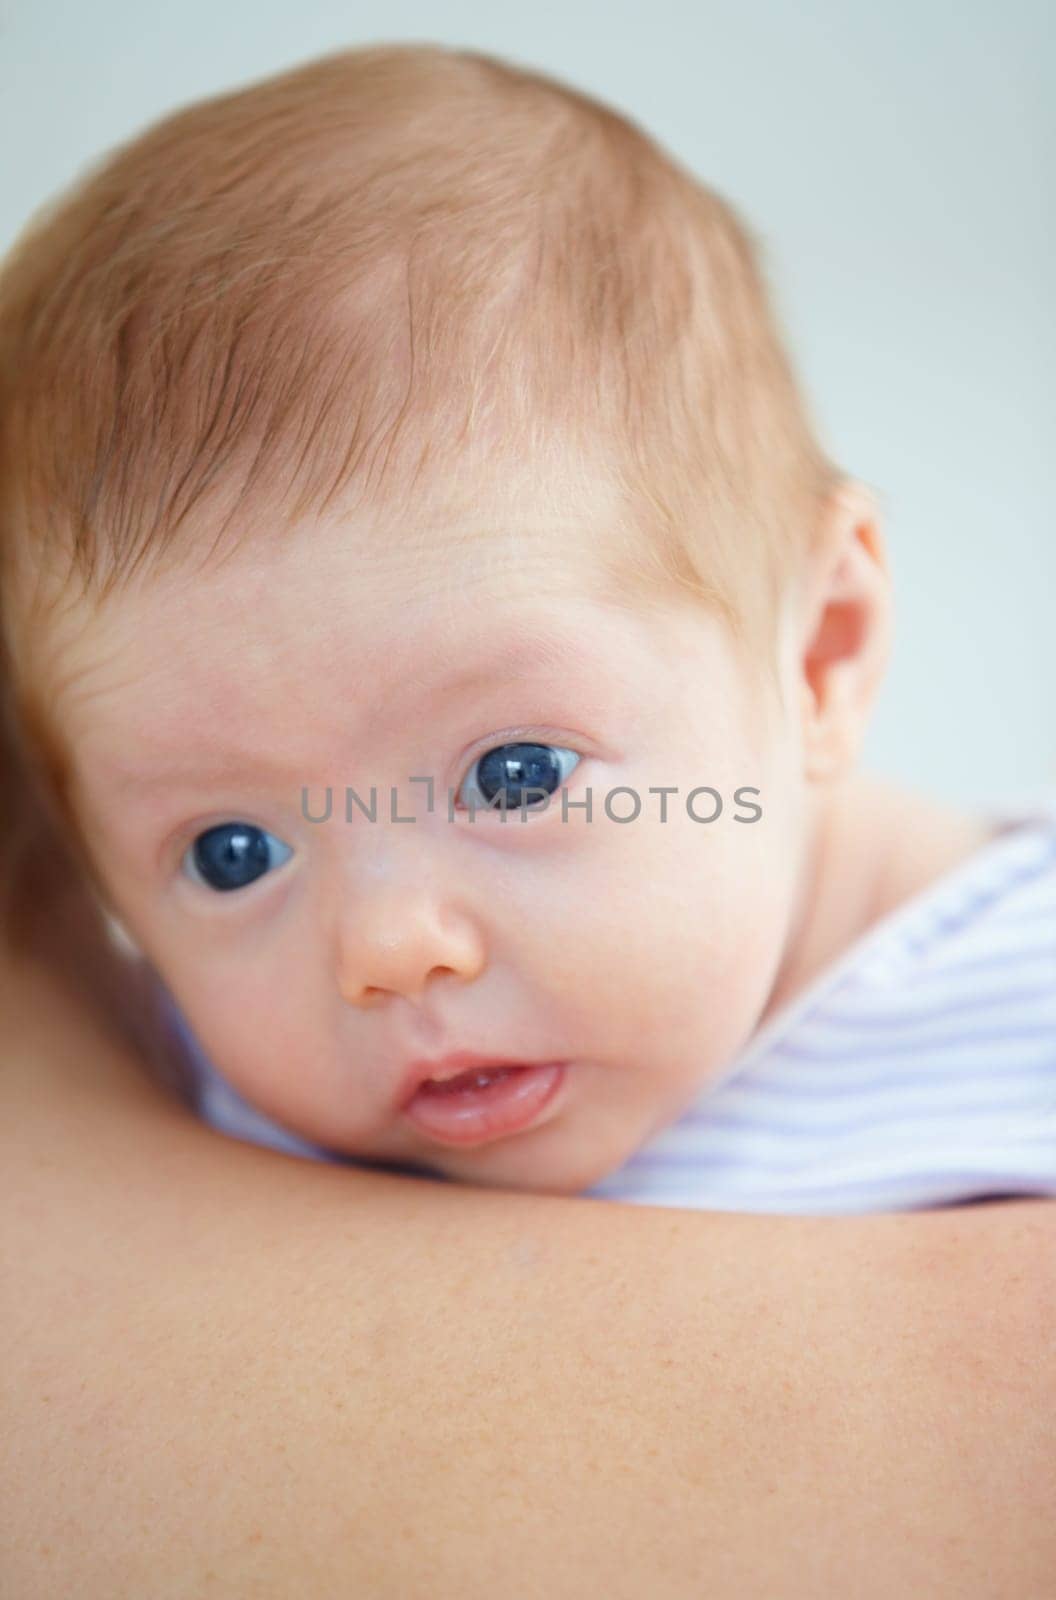 Family, shoulder and parent with baby in home for bonding, loving relationship and affection. Love, bedroom and closeup of mother carrying newborn for child development, growth and care in nursery.